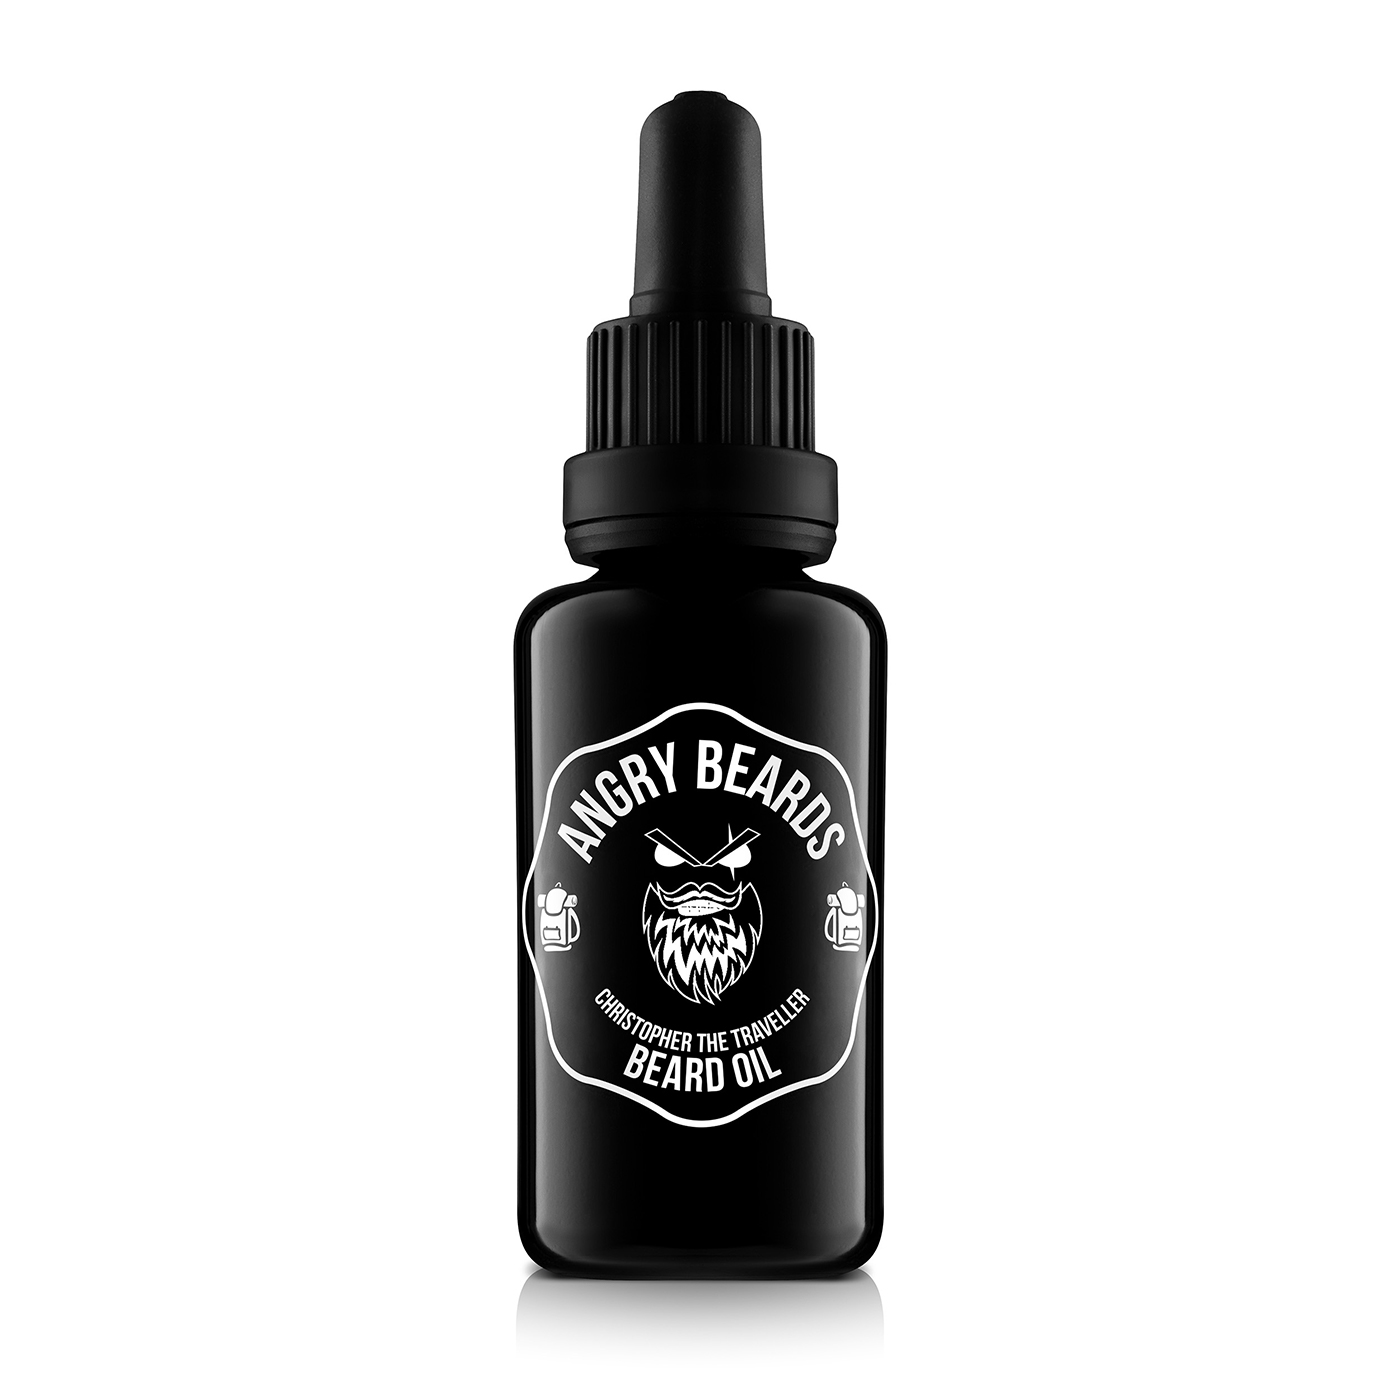 Angry Beards Christopher The Traveller, olej na vousy 30 ml